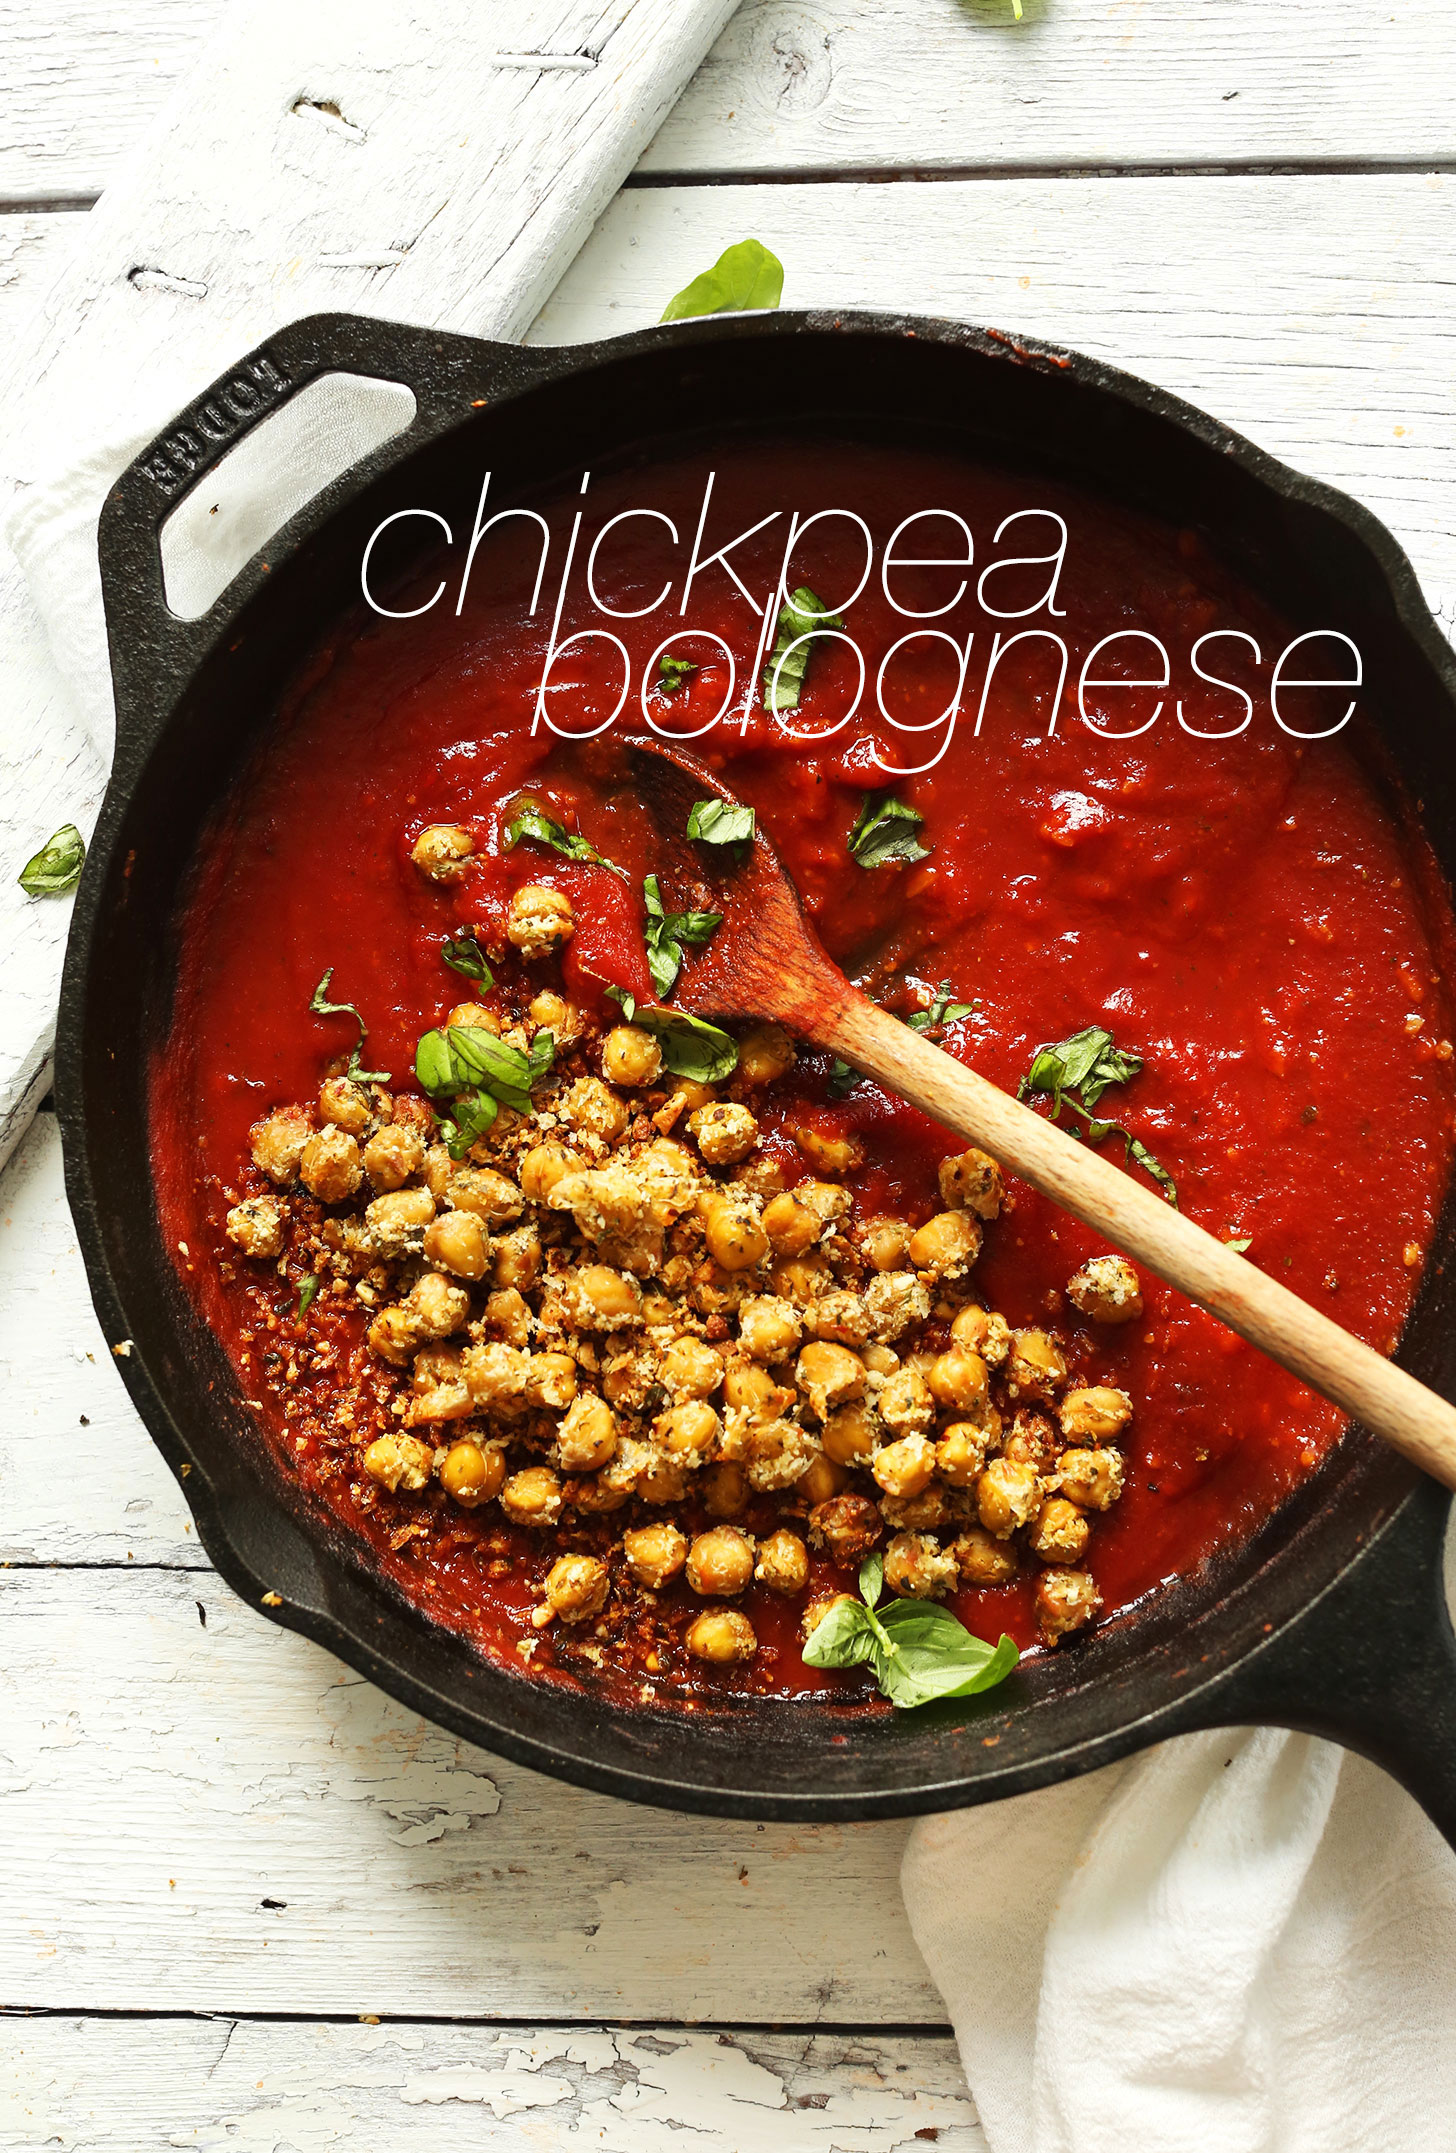 Cast-iron skillet filled with our gluten-free vegan recipe of Chickpea Bolognese